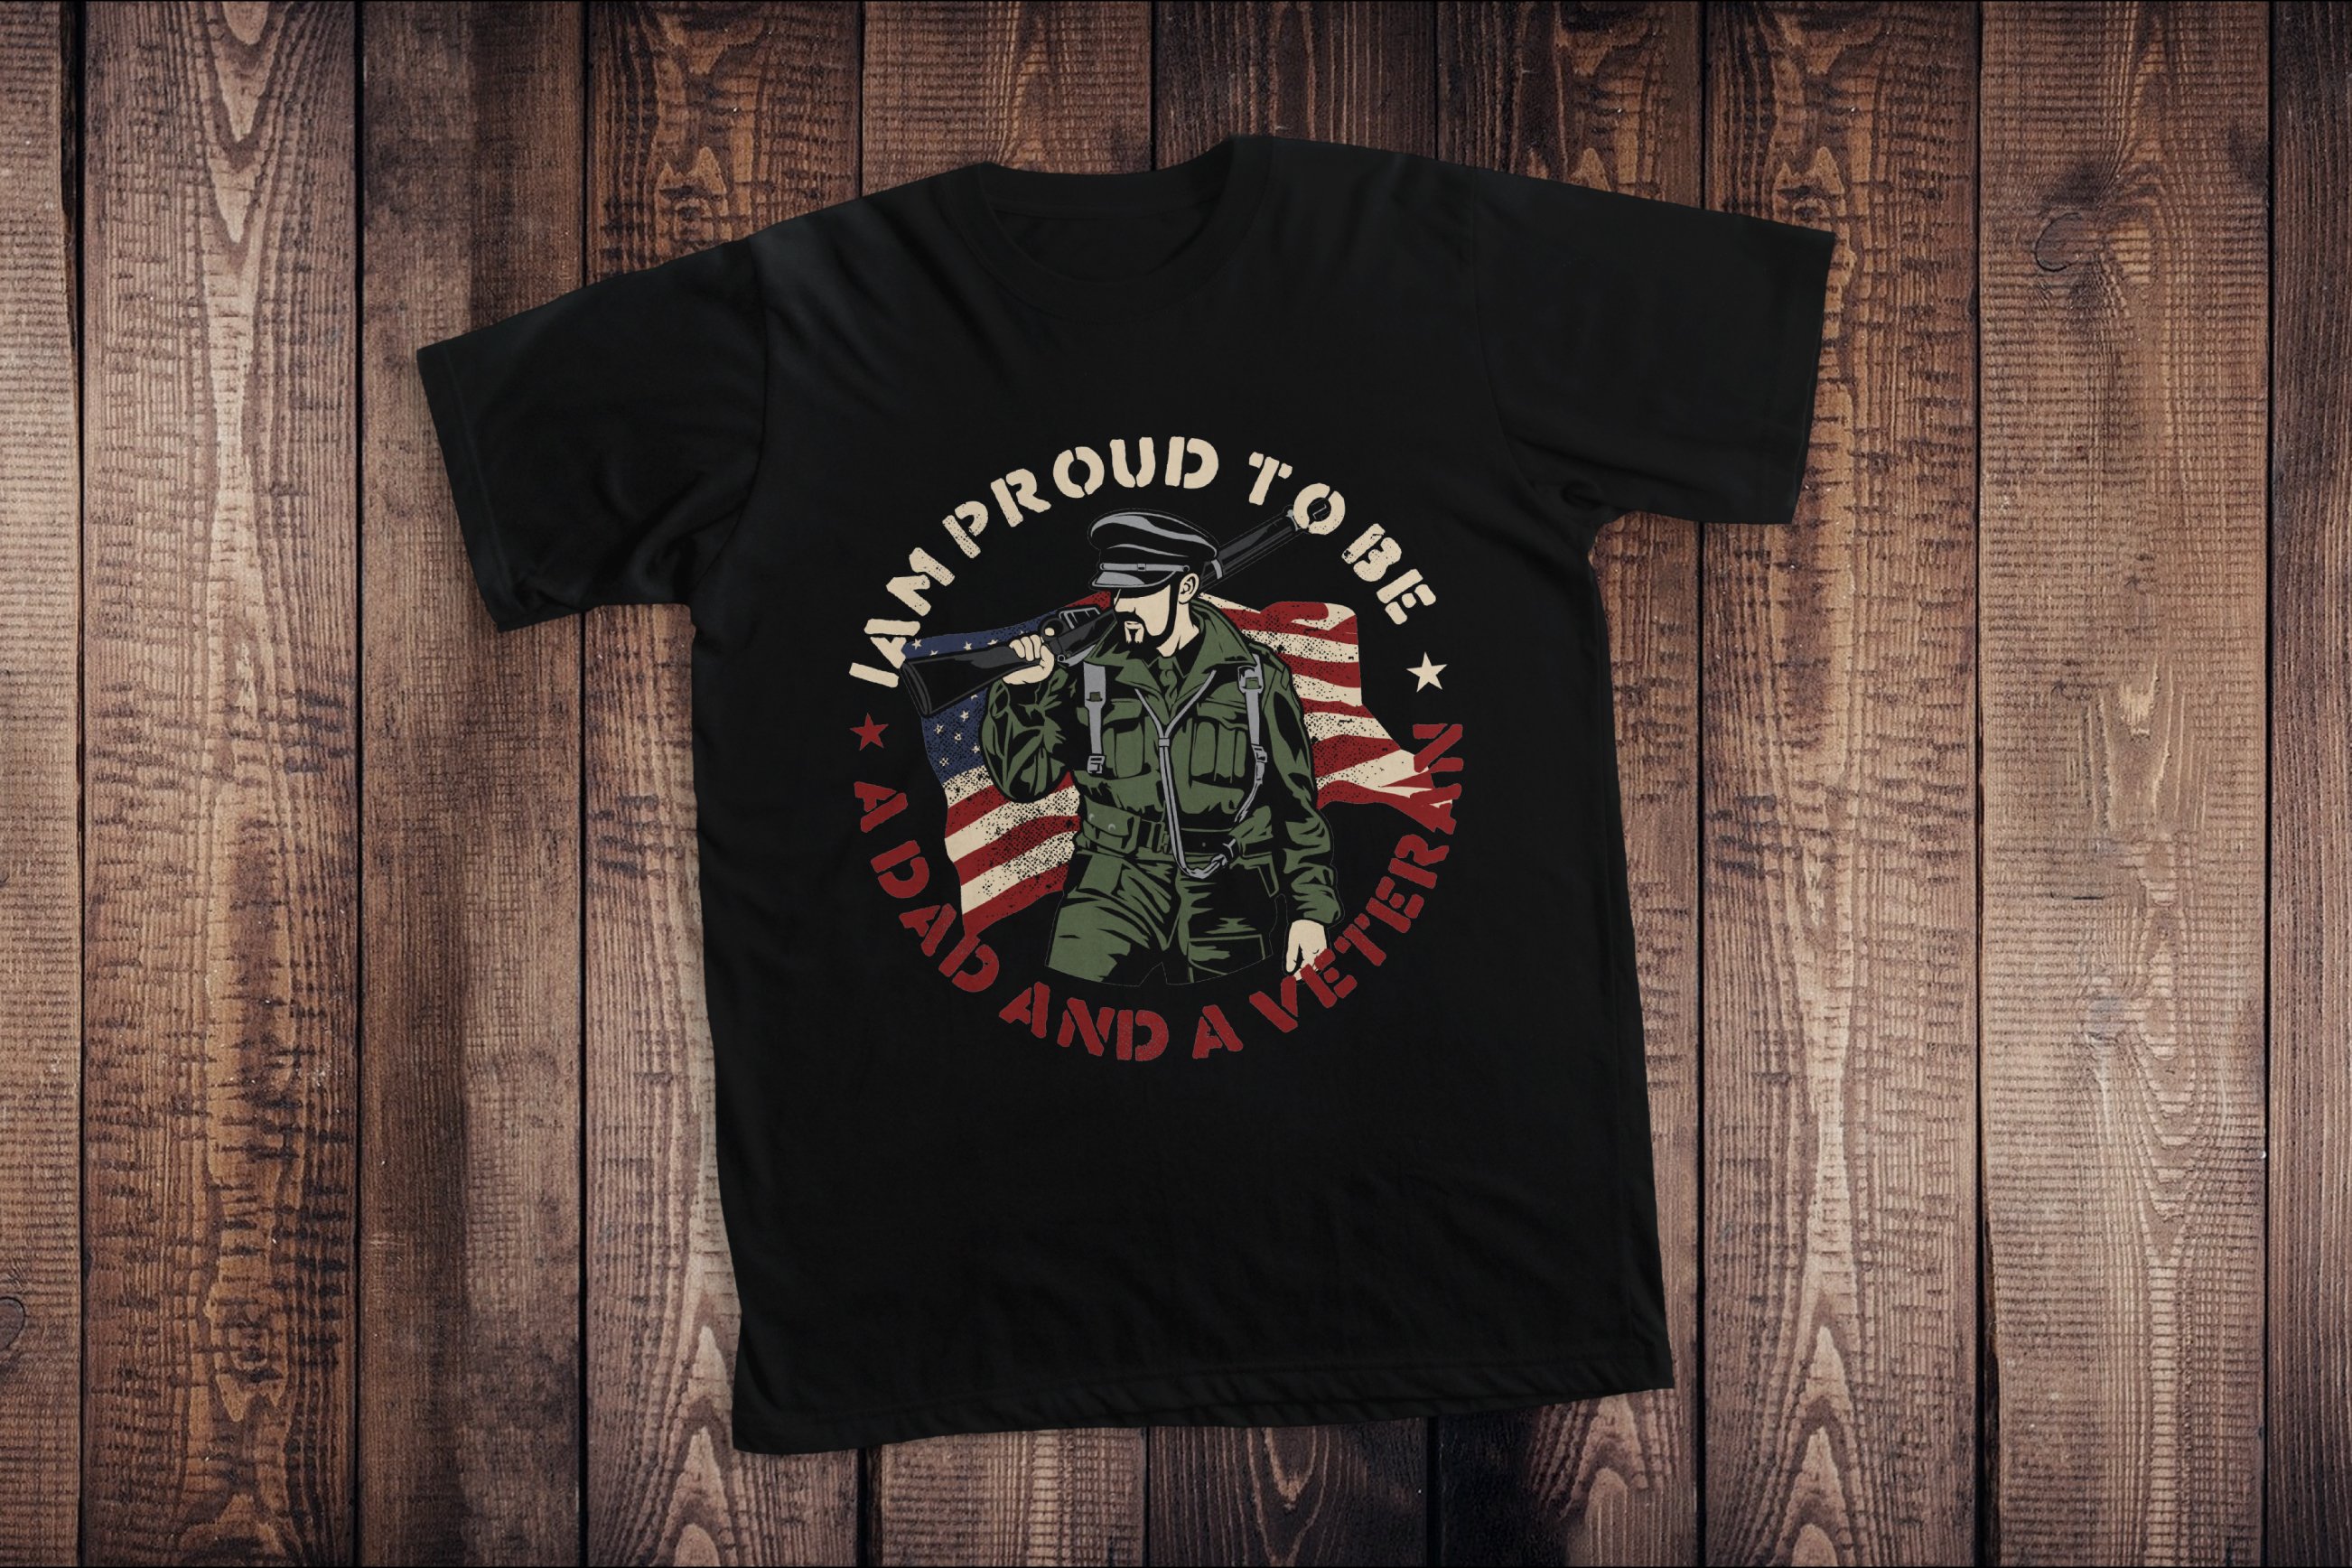 Black t-shirt with the veteran illustration in a round shape.